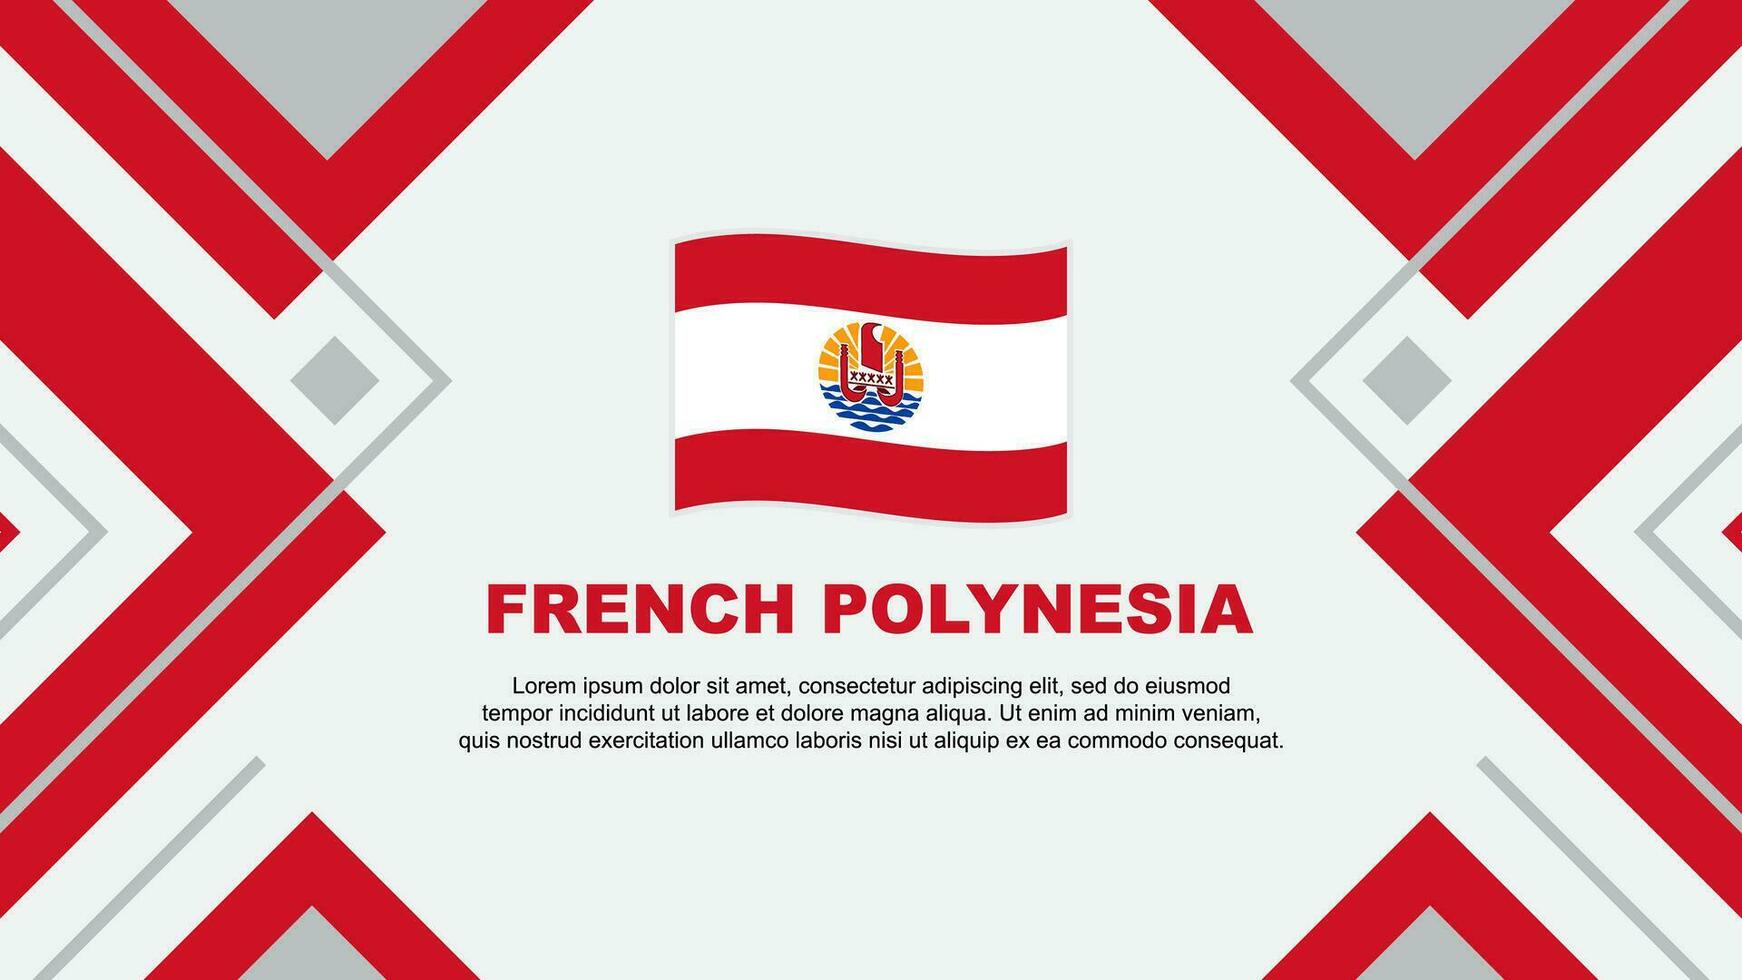 French Polynesia Flag Abstract Background Design Template. French Polynesia Independence Day Banner Wallpaper Vector Illustration. French Polynesia Illustration